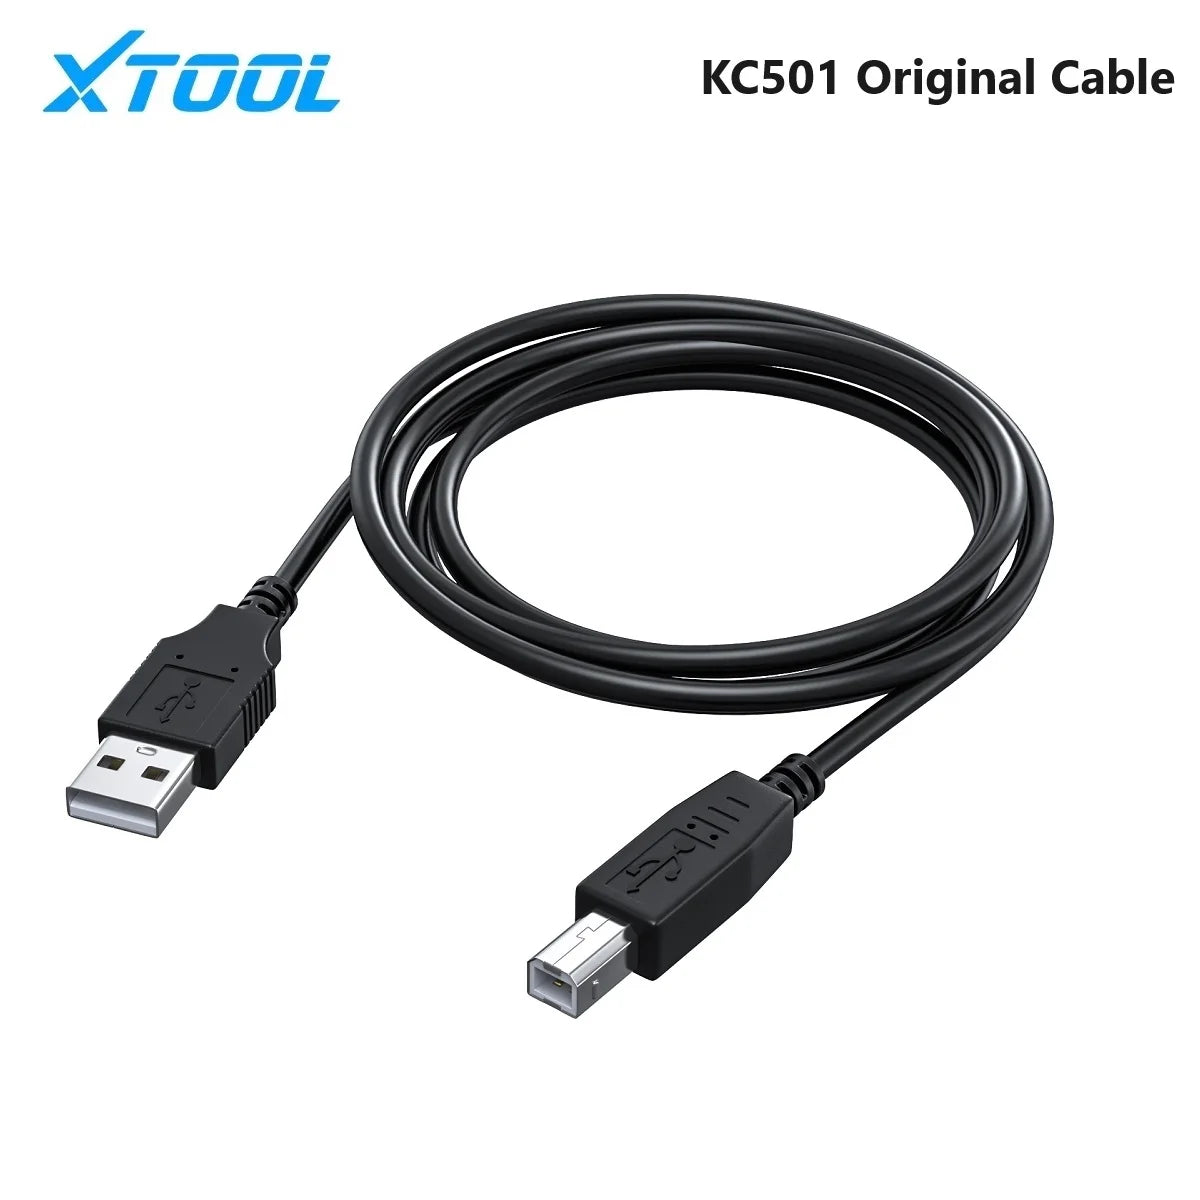 XTOOL 100% Original KC100 Cables For XTOOL X100 PAD3 For VW4&5th IMMO XTOOL KC501 Cable For X100MAX Key Programming - Dynamex